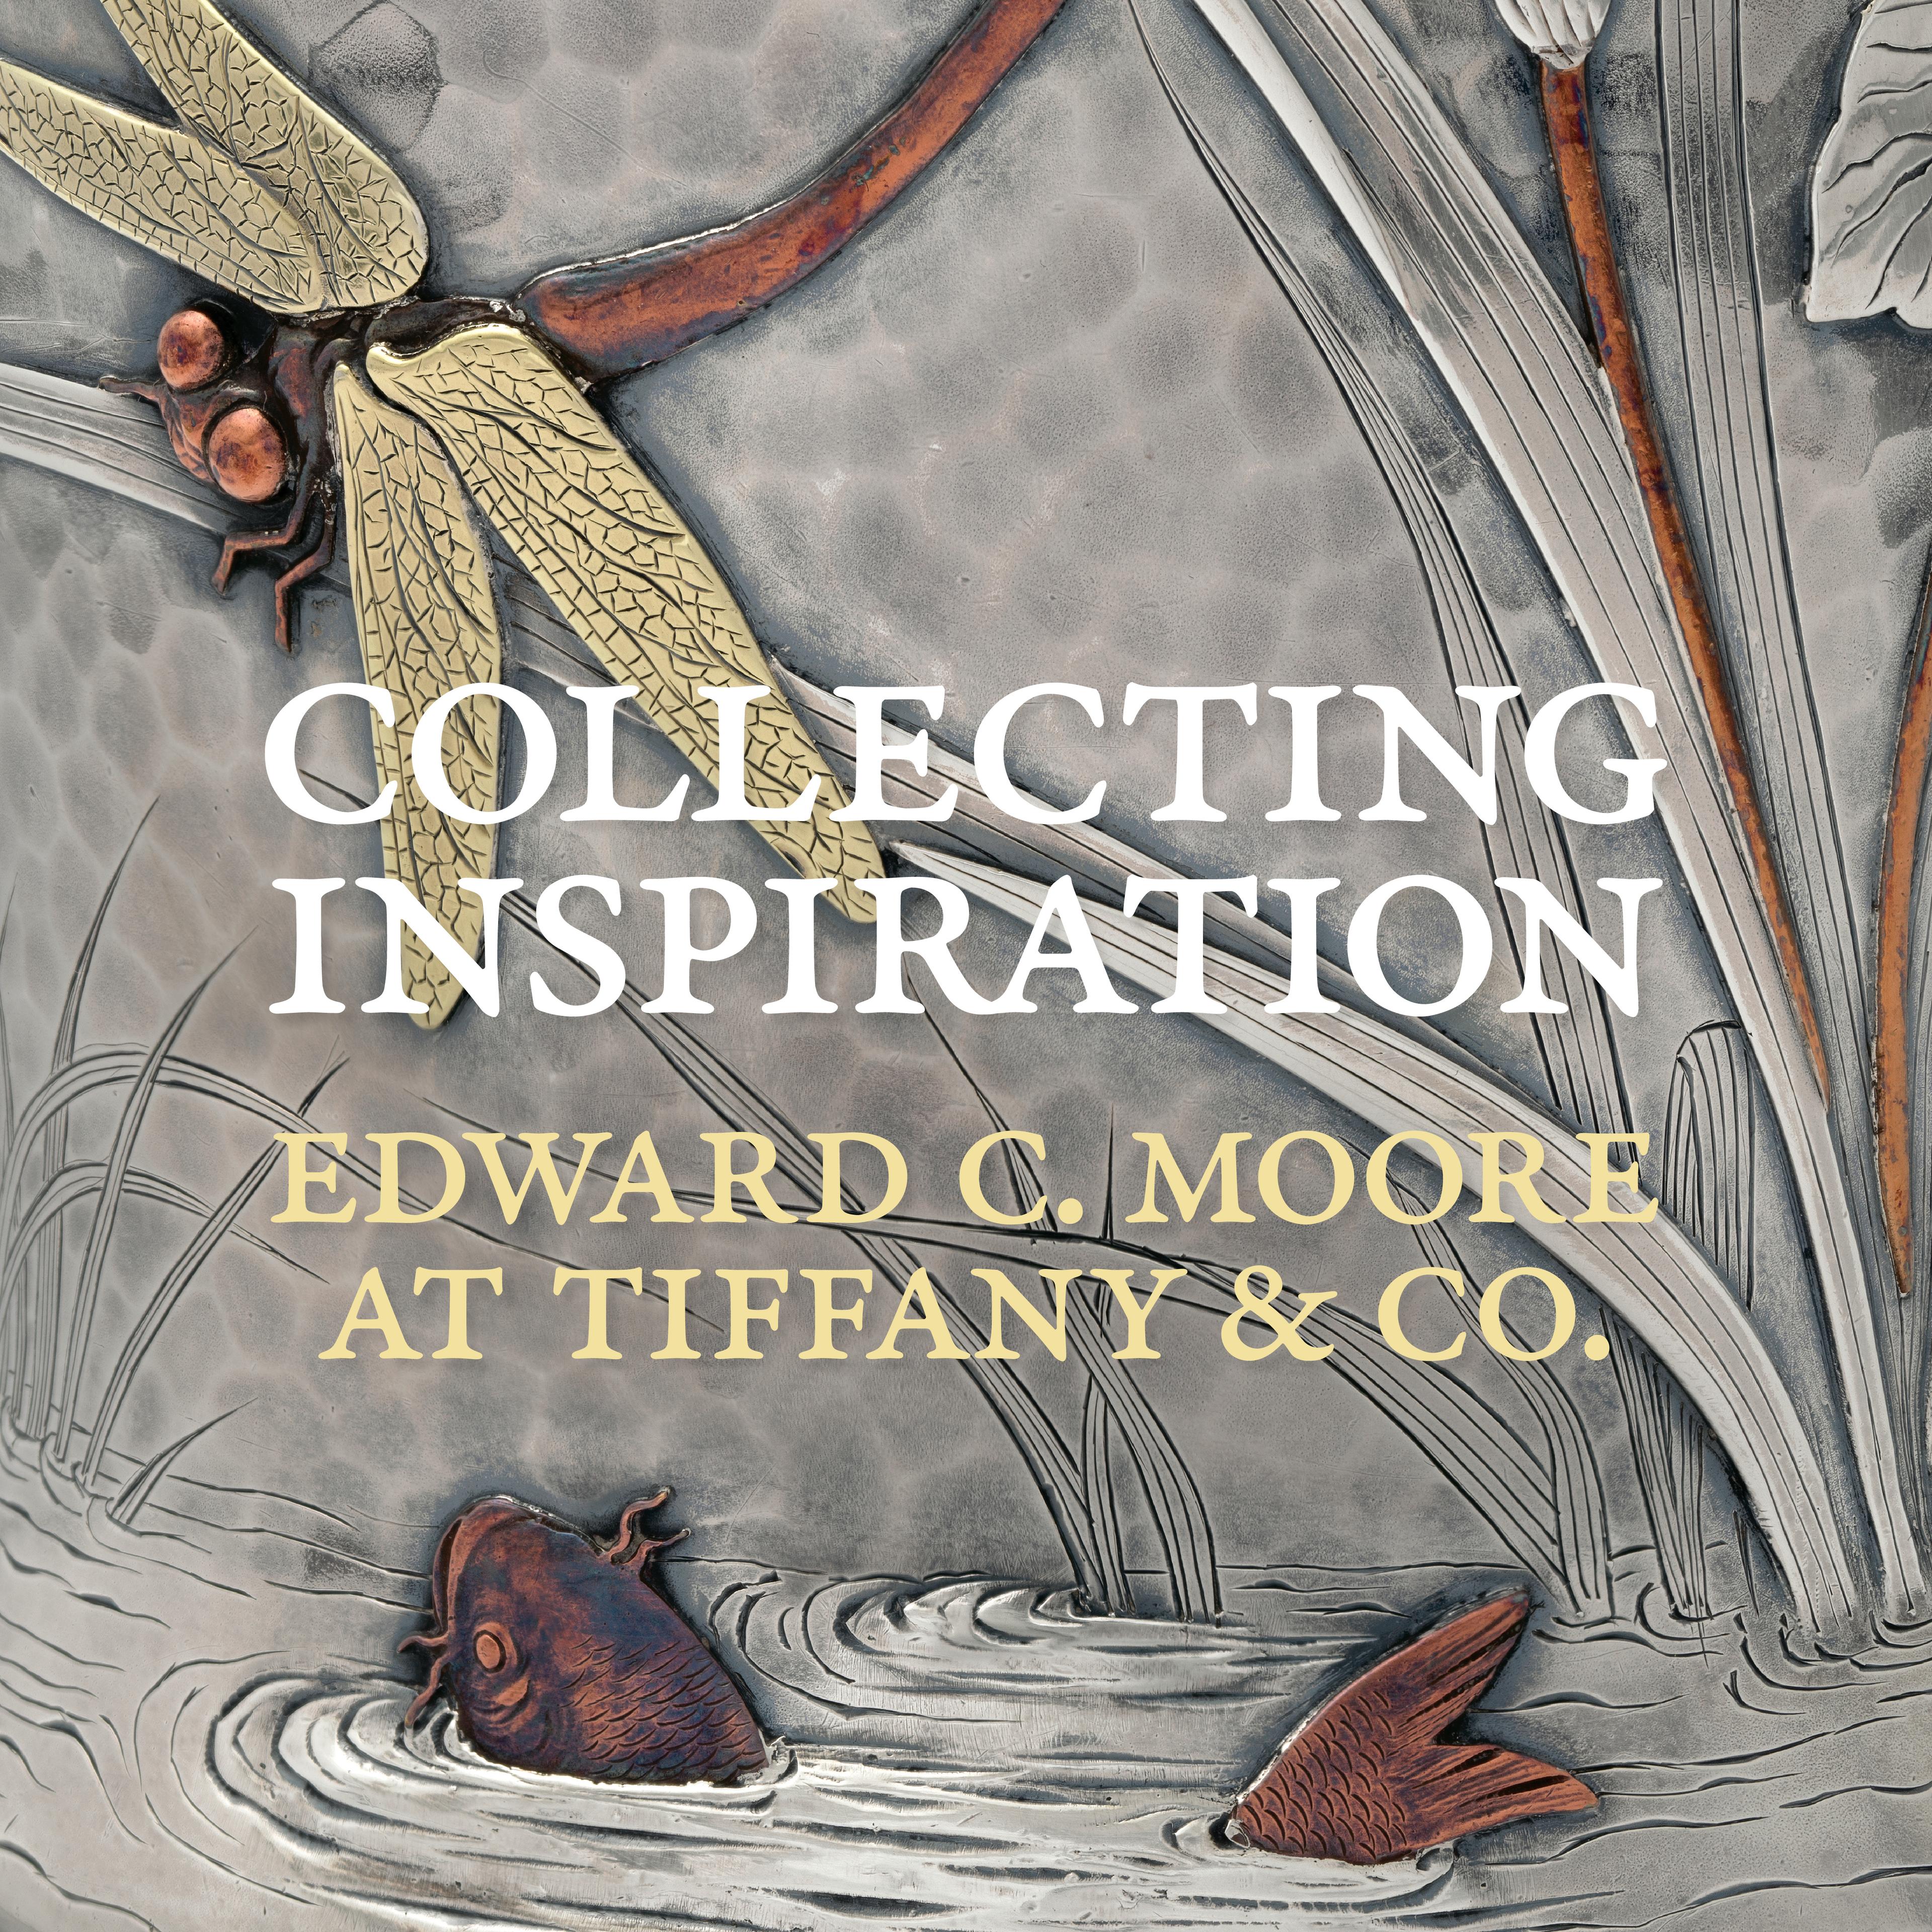 Picture of bold letter wording "collecting inspiration. Edward C. Moore at Tiffany and co" with drawing of a copper fish coming up for water and a dragon fly landing on plants. 